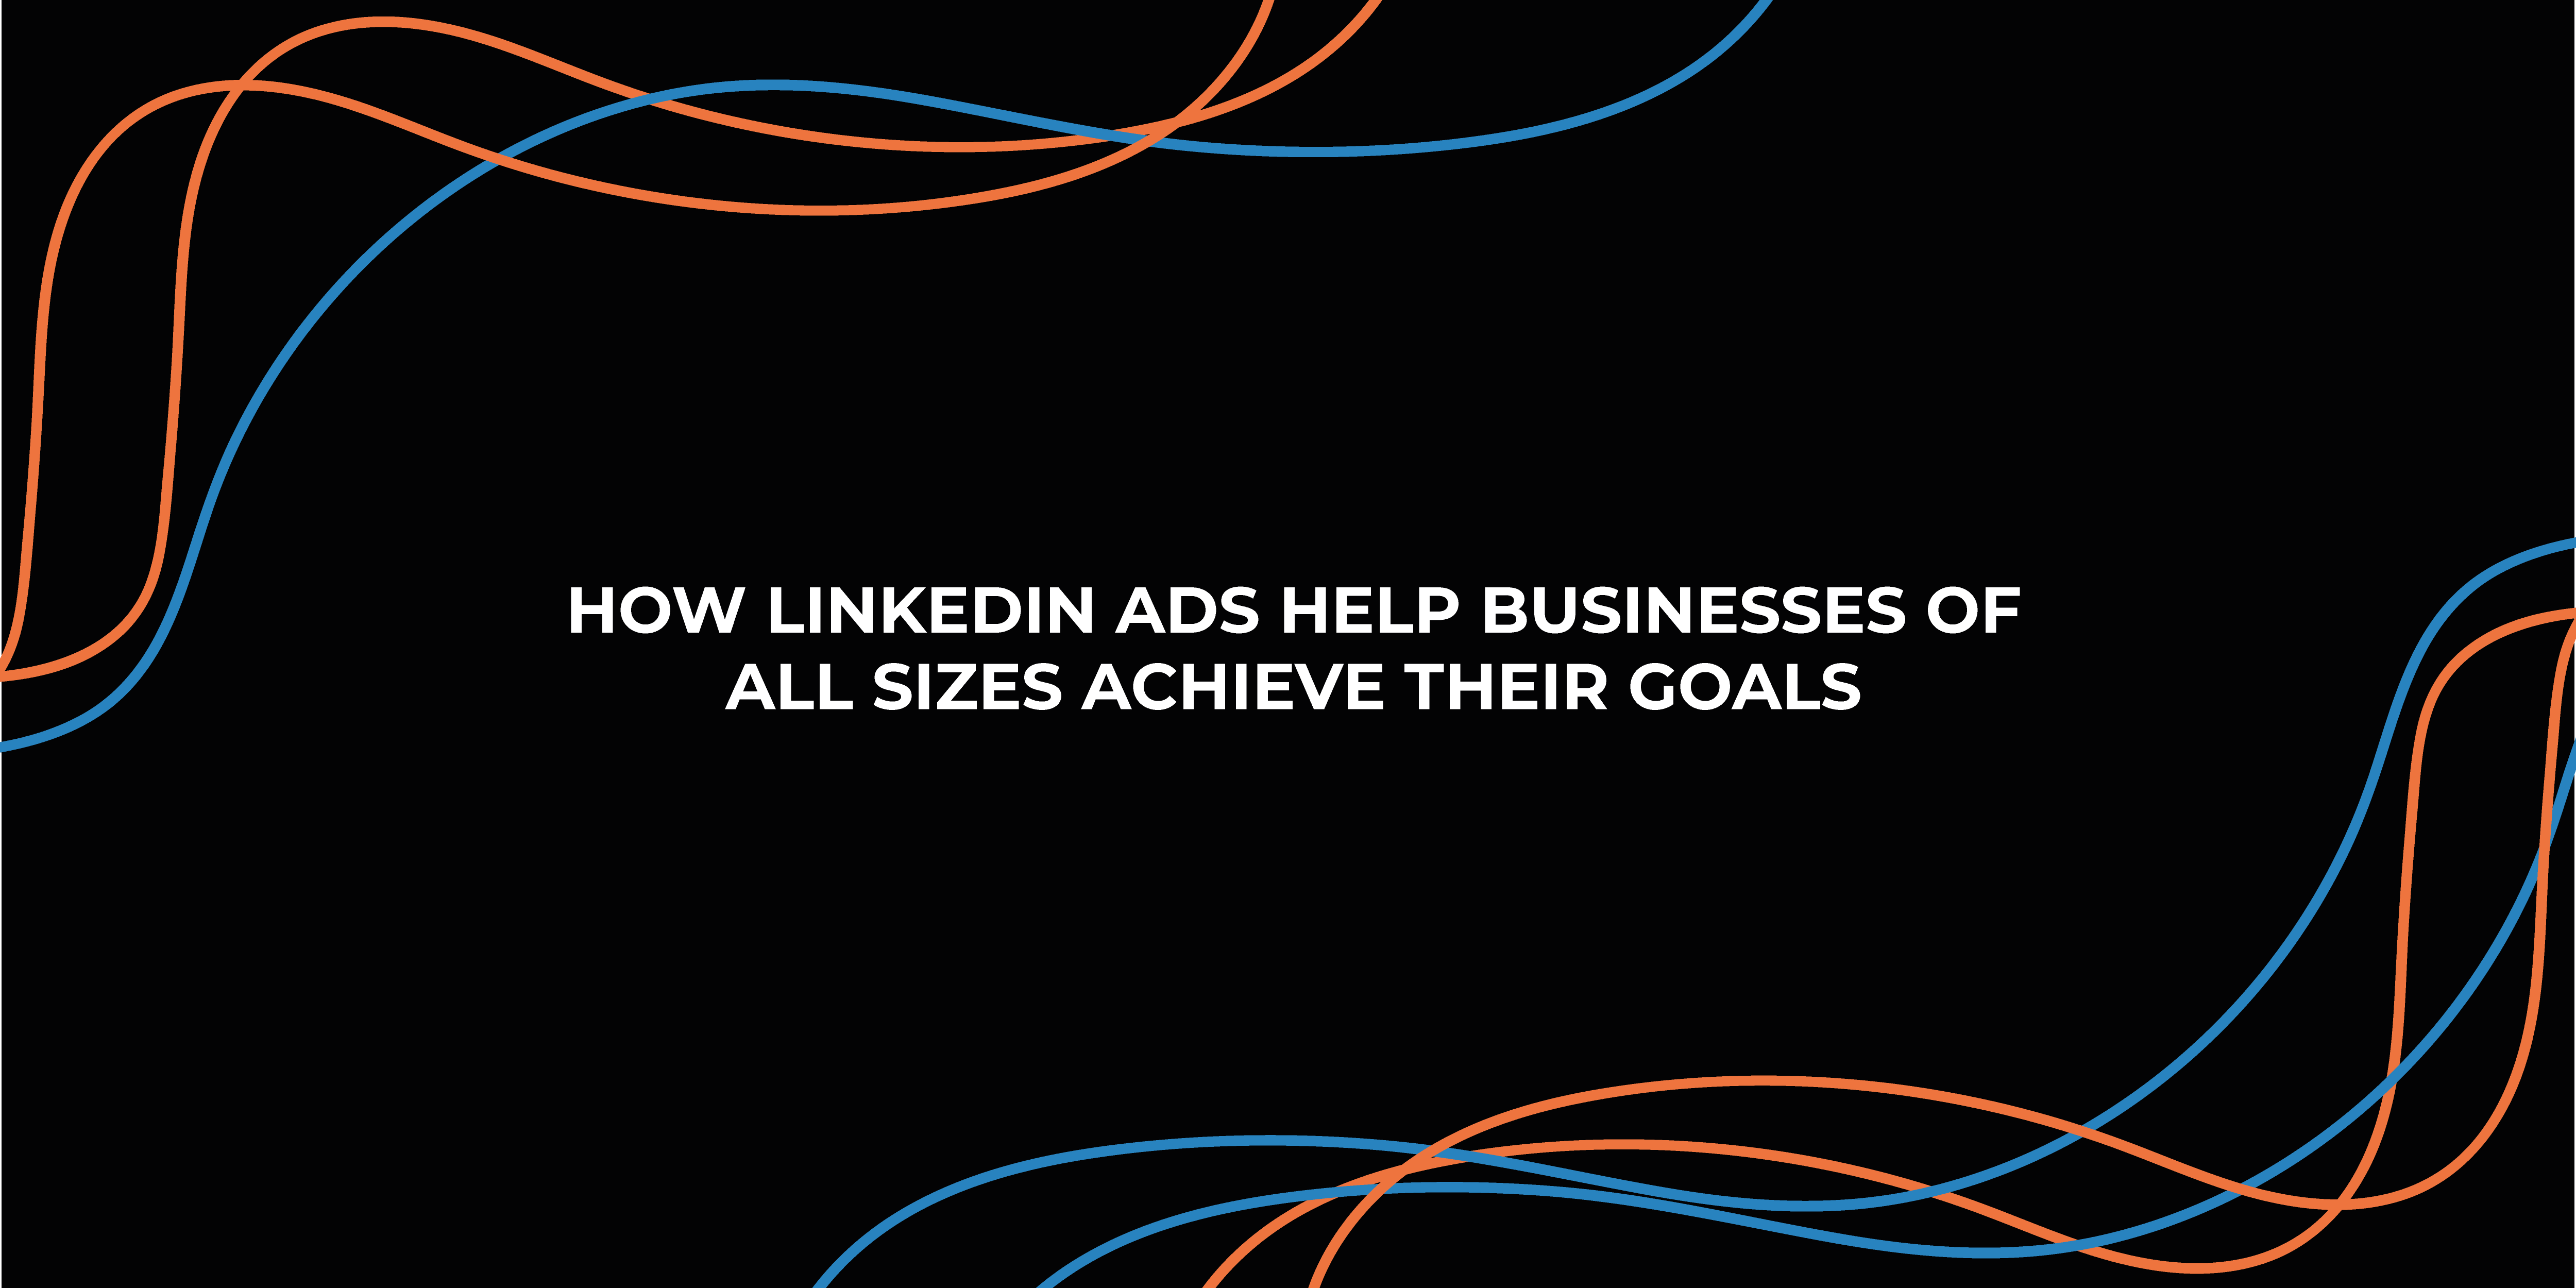 How LinkedIn Ads Help Businesses of All Sizes Achieve Their Goals